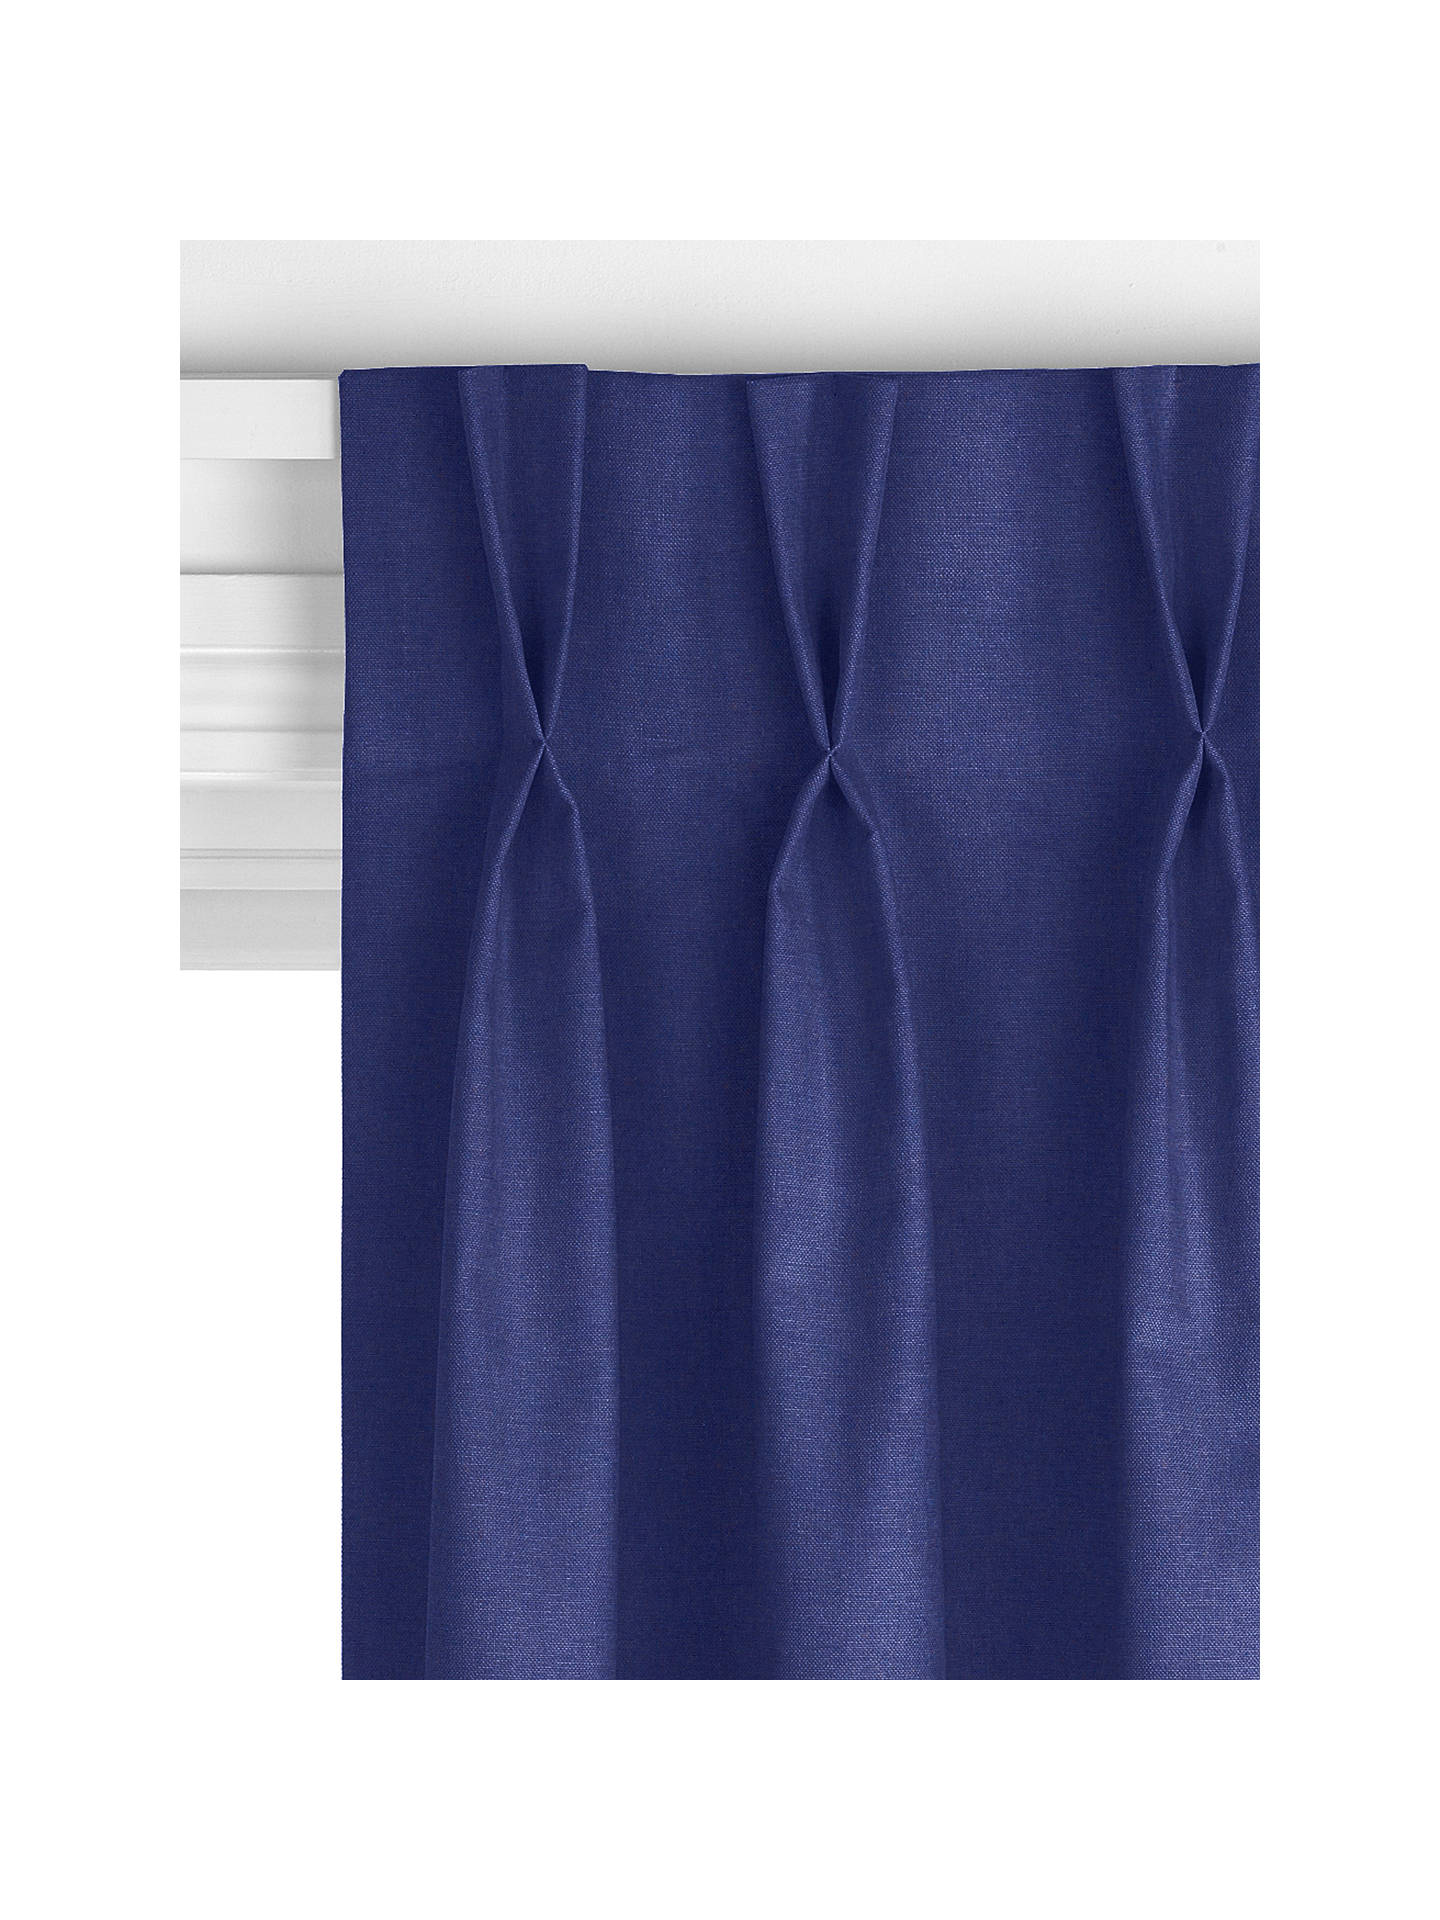 John Lewis & Partners Linen Look Made to Measure Curtains, Navy